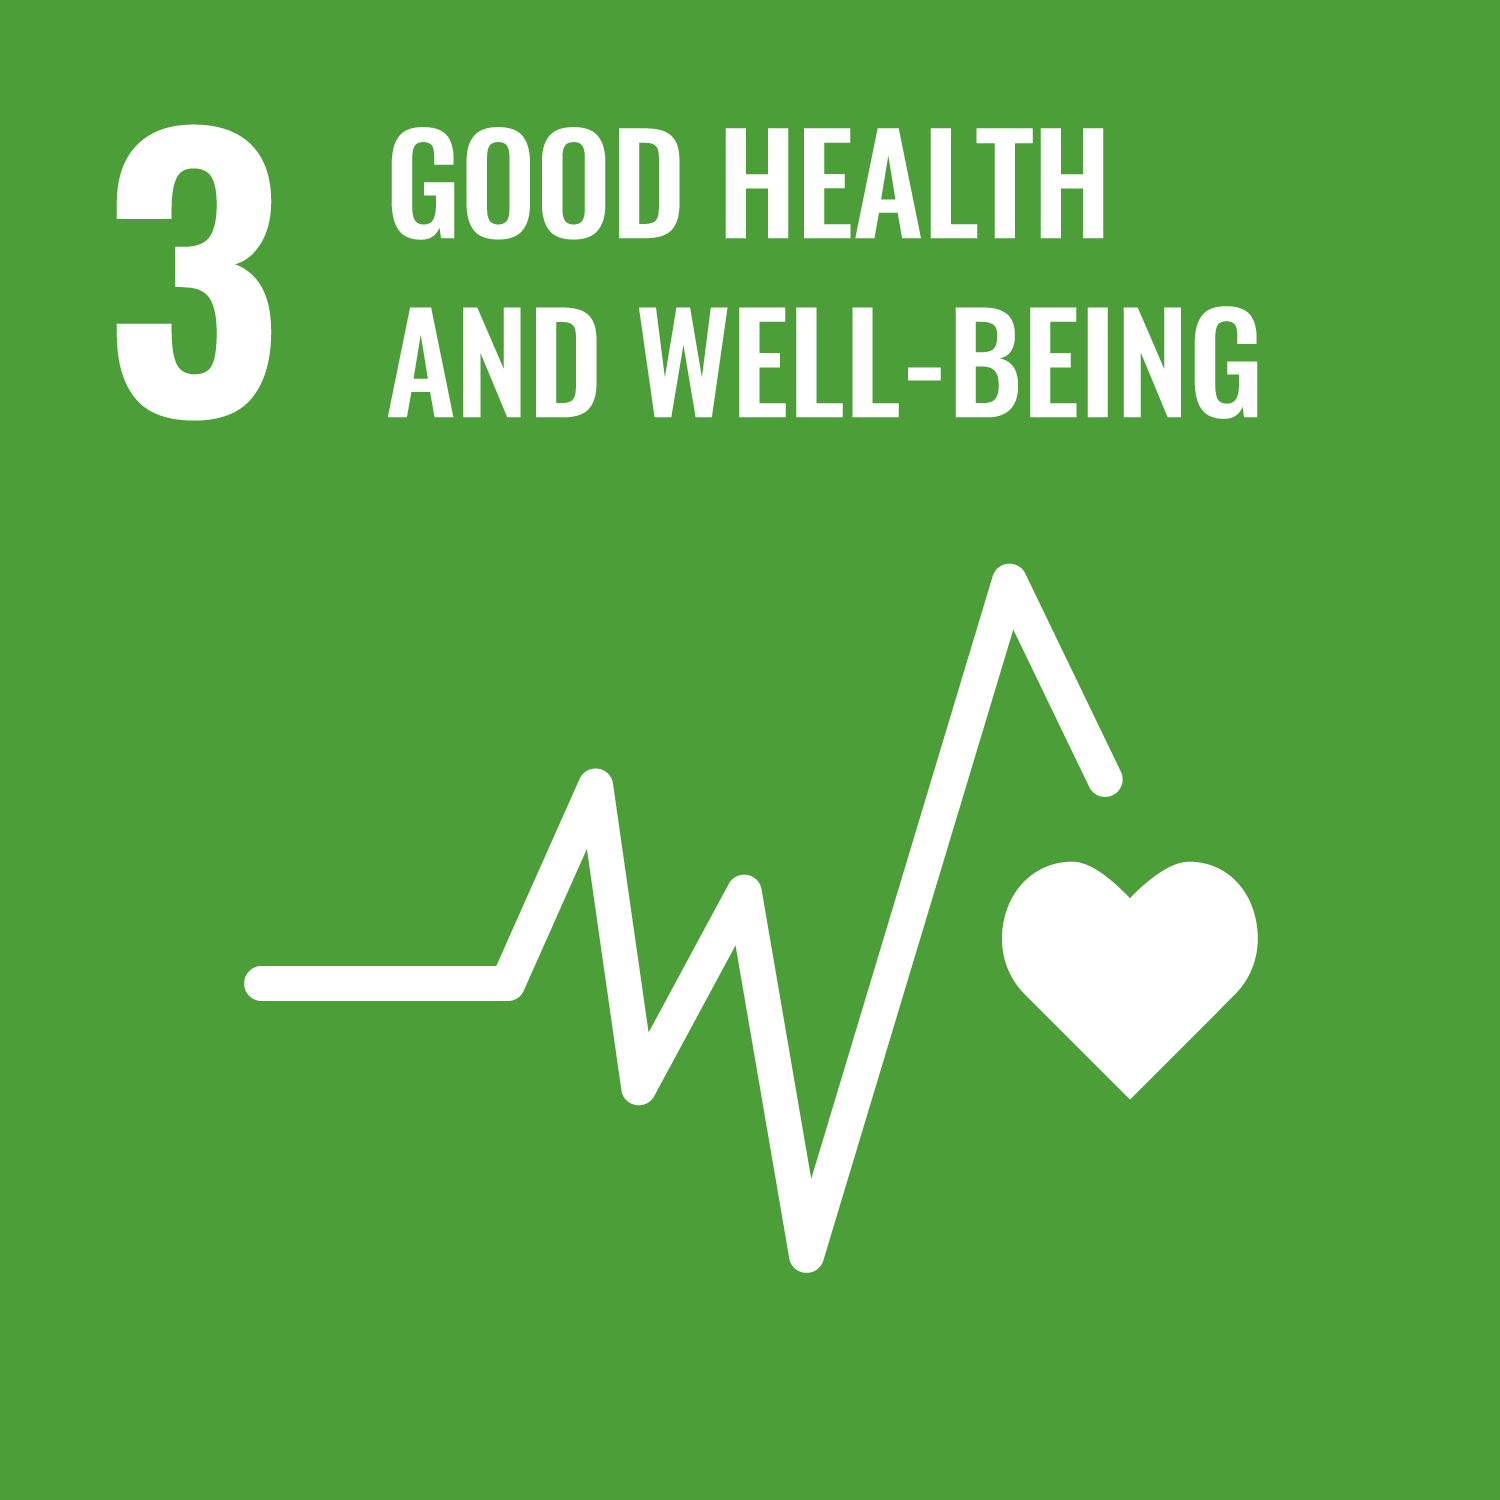 SDGs Goal 3: Good Health and Well-Being